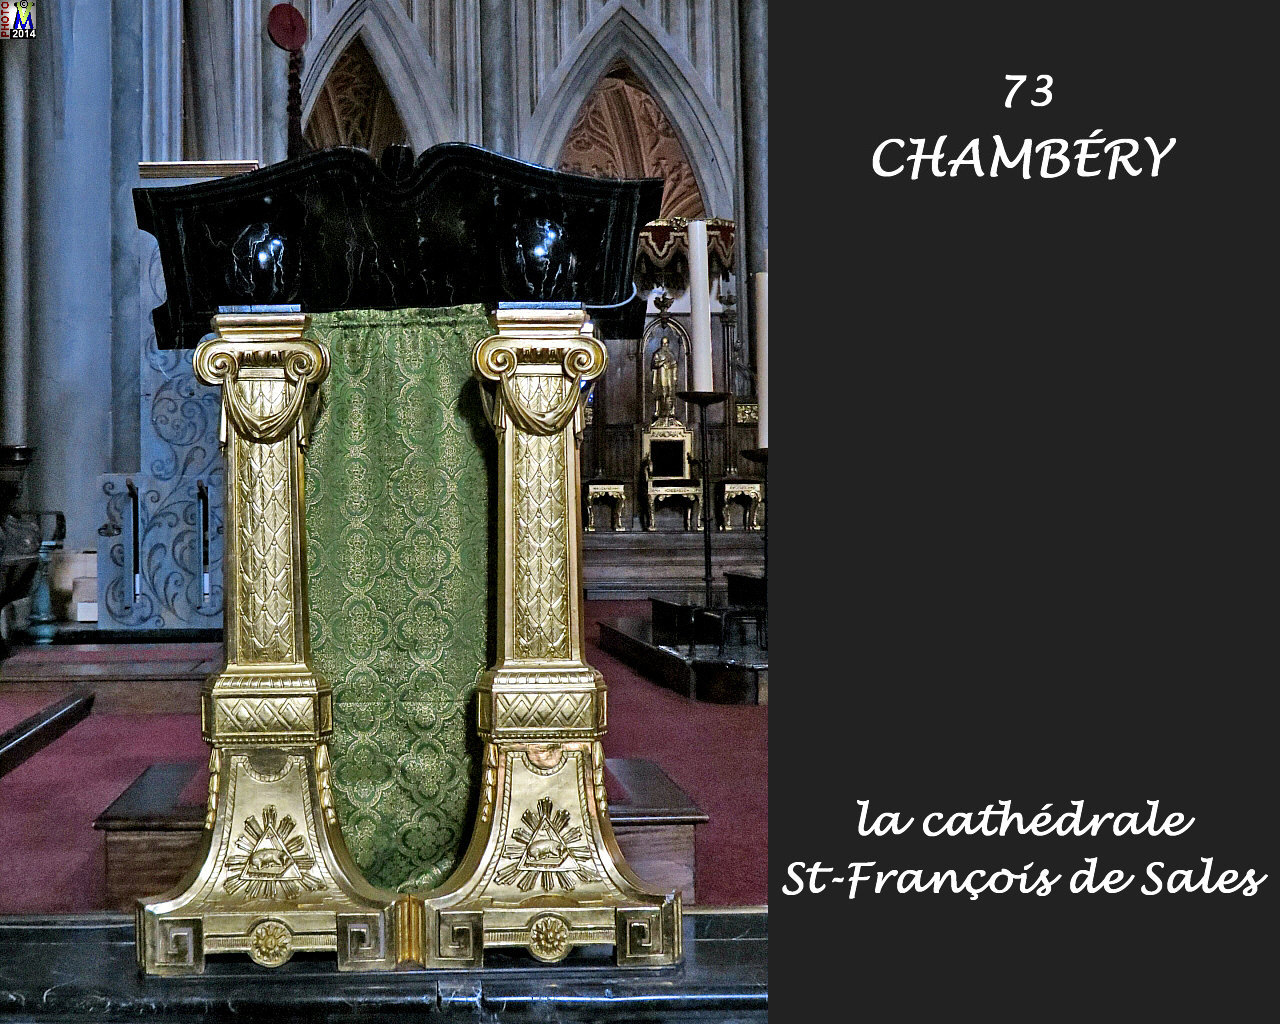 73CHAMBERY_cathedrale_230.jpg